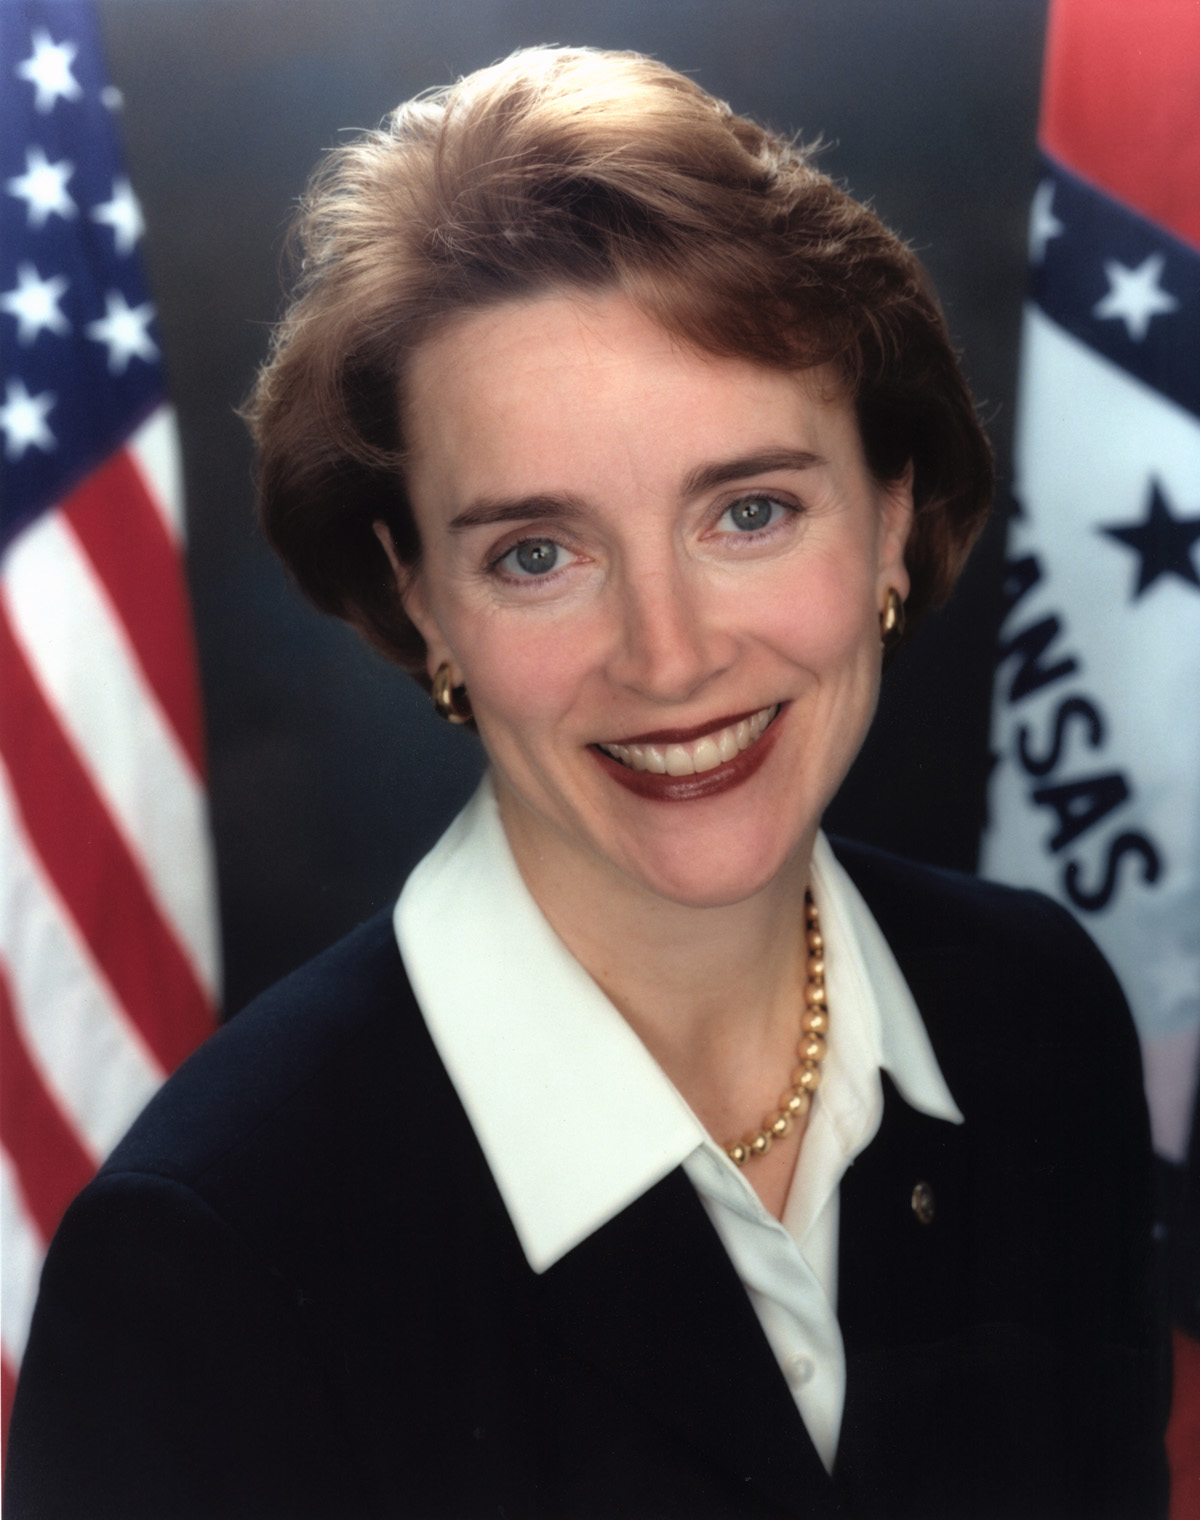 Image:Blanche Lincoln official portrait.jpg